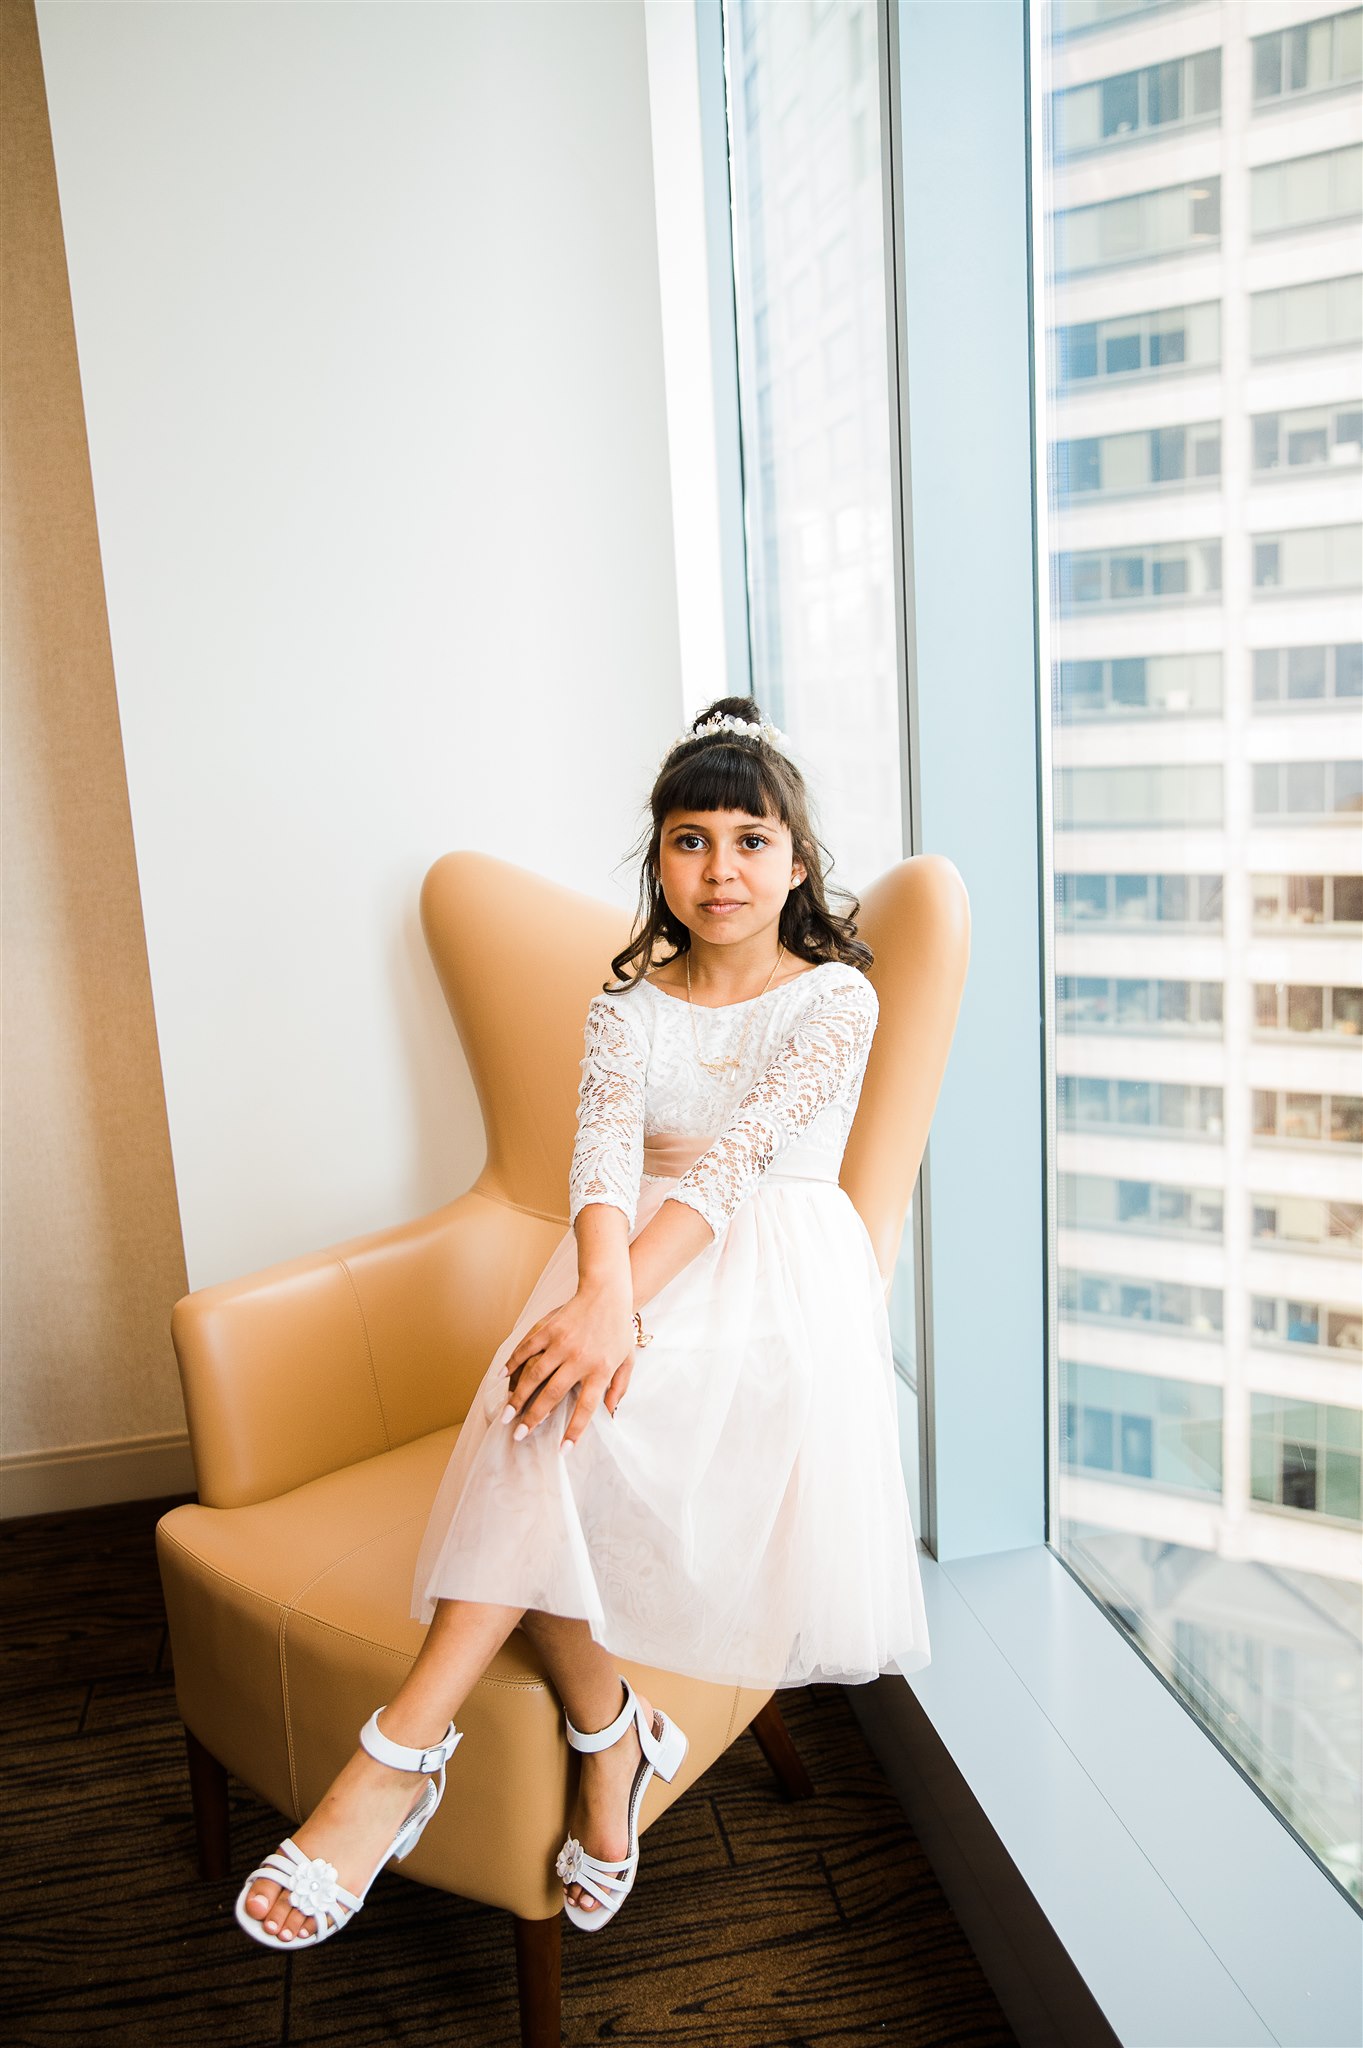 Downtown Seattle Wedding, Lotte Hotel Wedding, Captured by Candace Photography, Seattle Wedding Photographer, Seattle Elopement Photographer